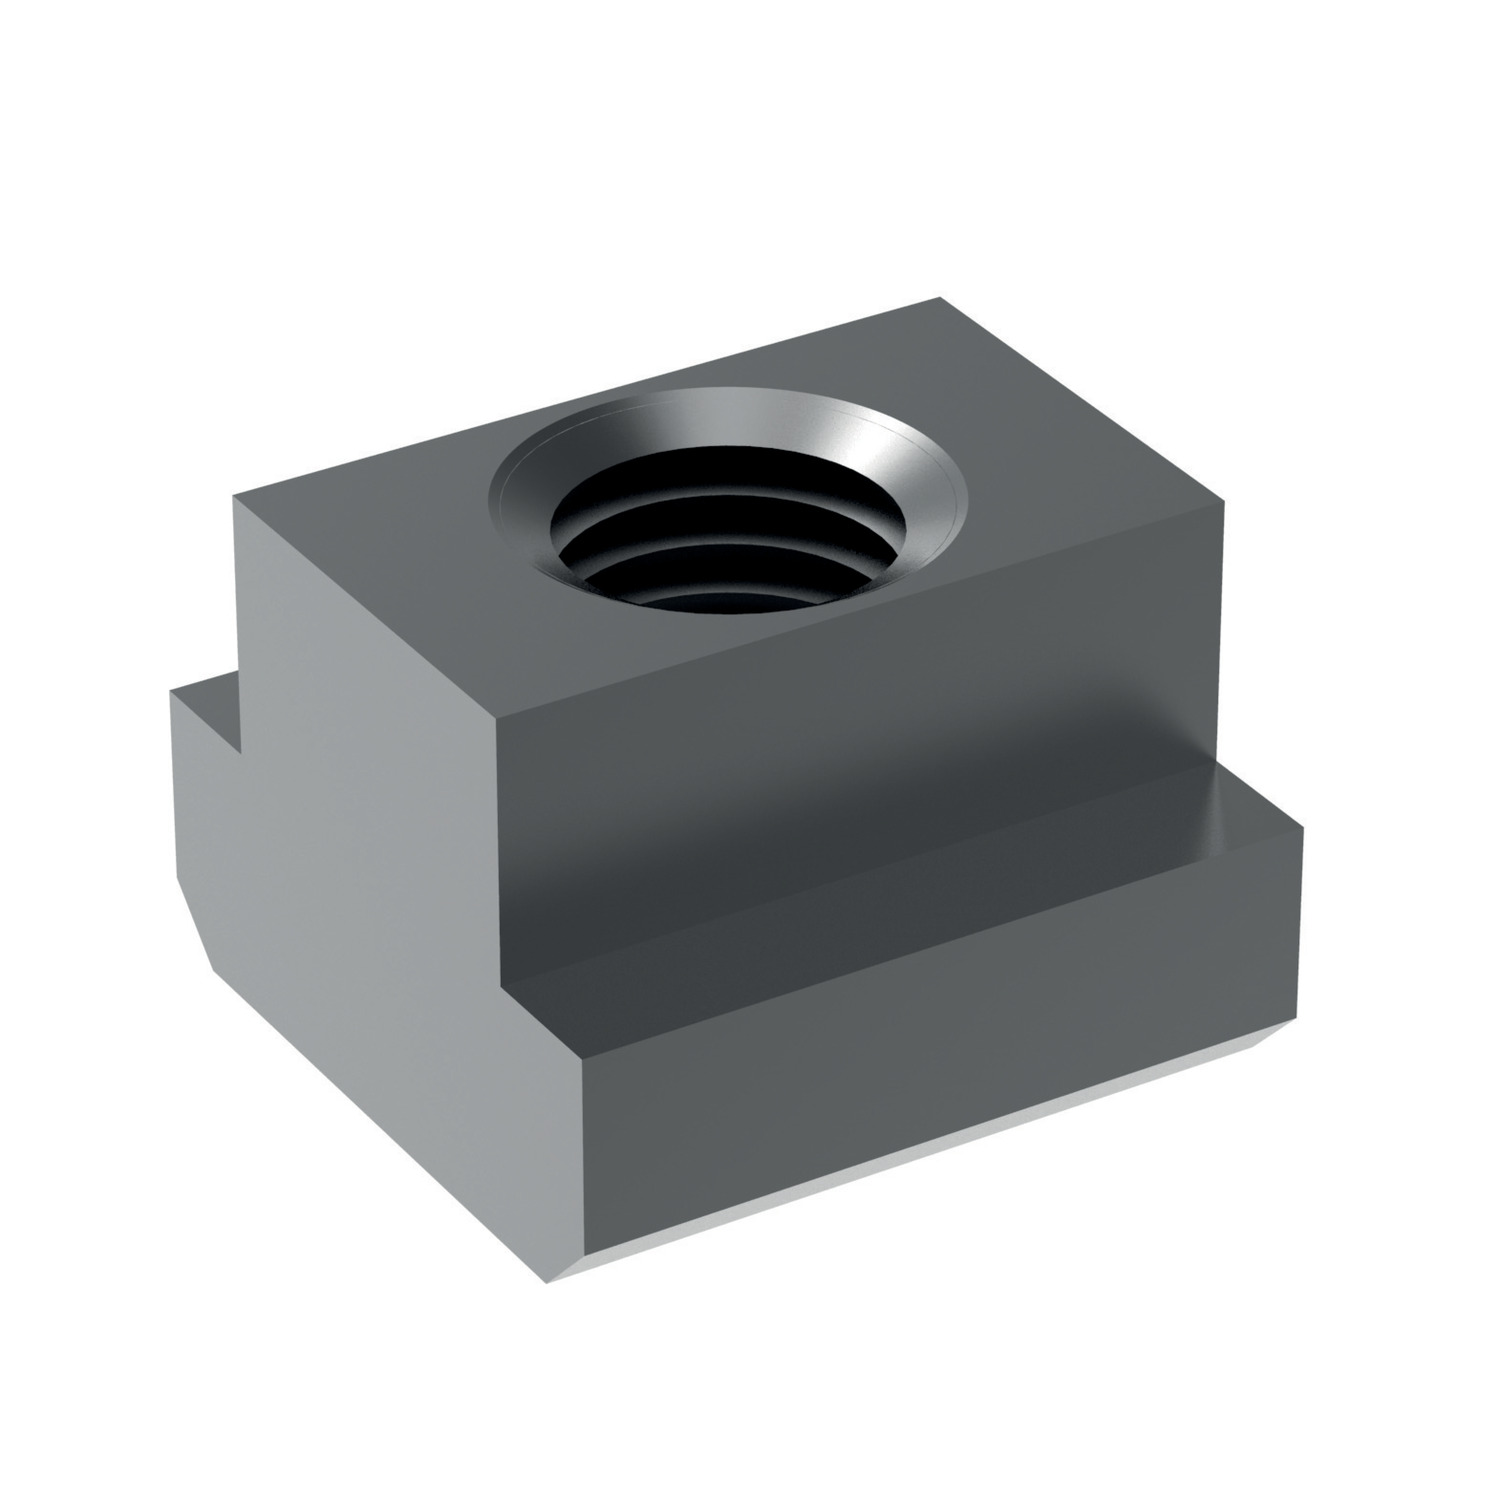 T-Nuts Standard t-nuts made from heat treated steel to tensile strength class 10.